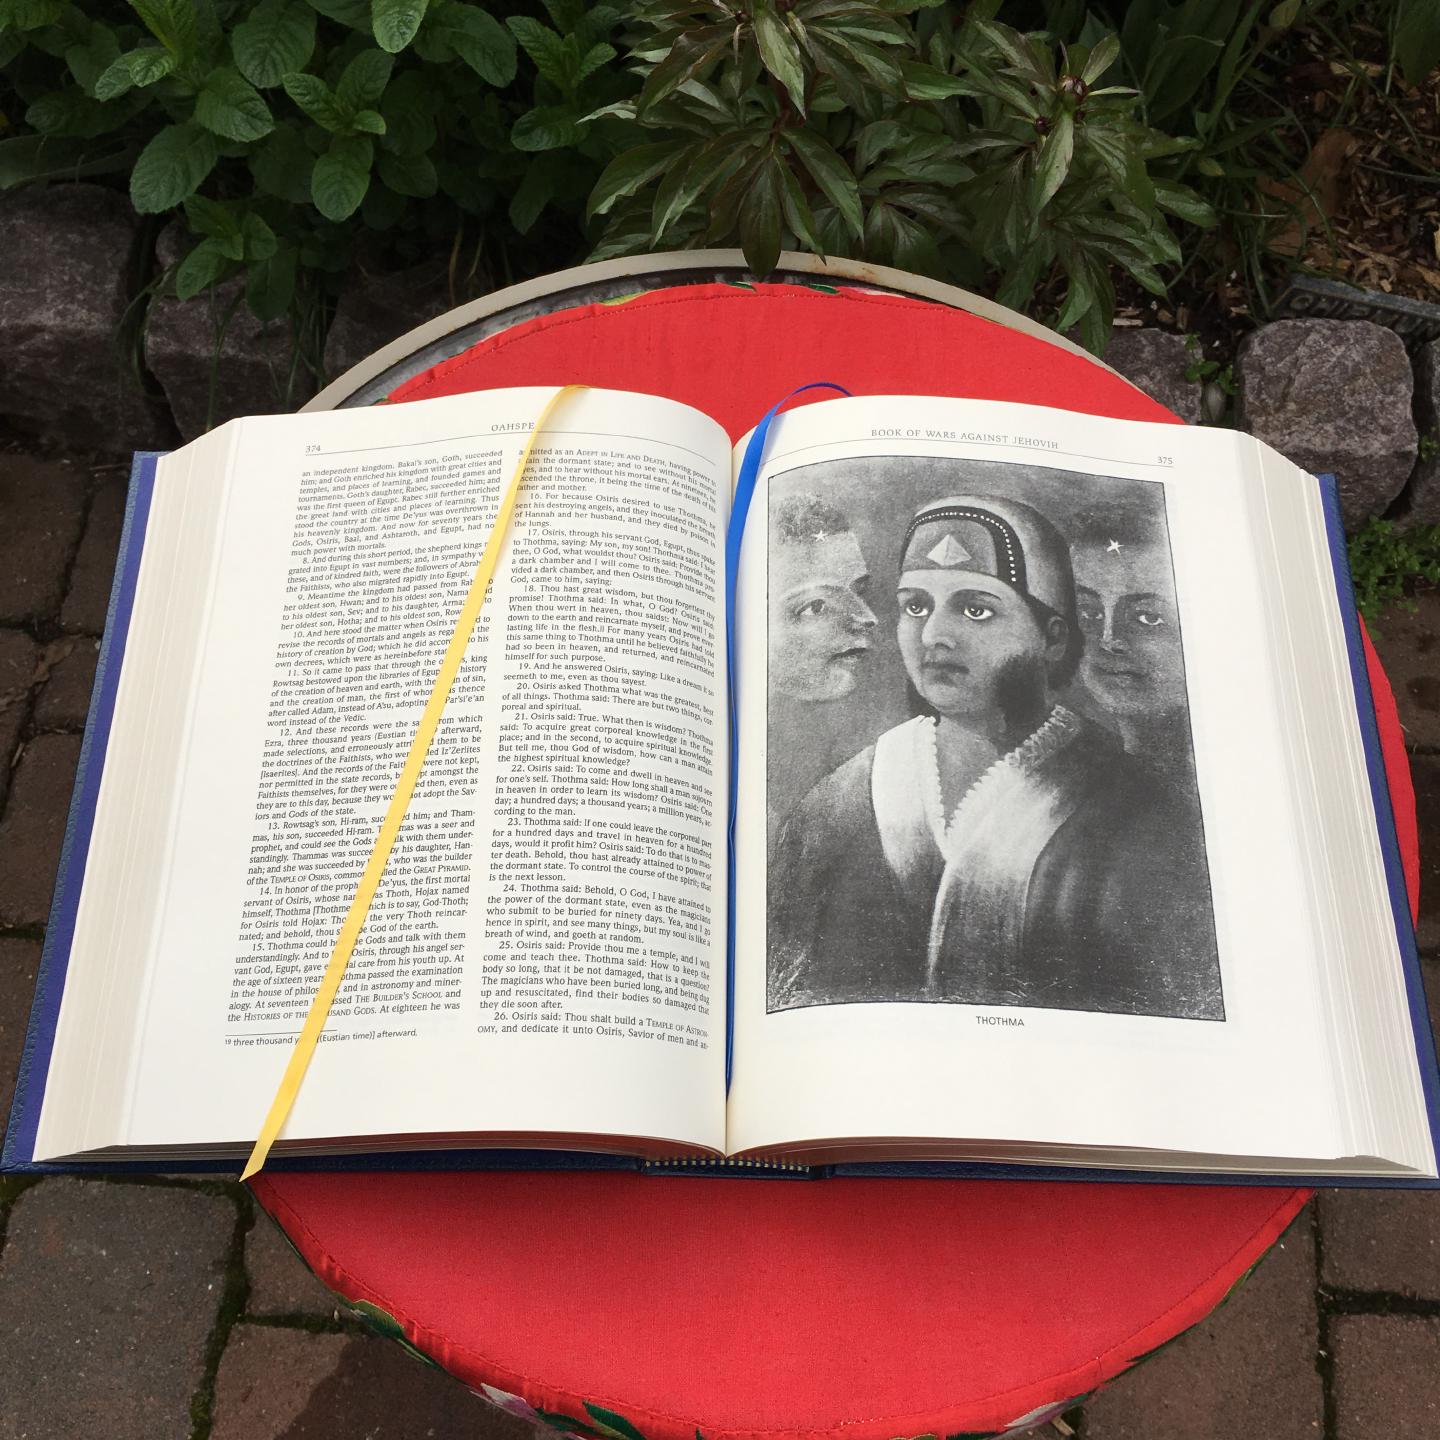 An open copy of Oahspe on a patio table. Built-in bookmark ribbons are visible, as is a portrait of Thothma.